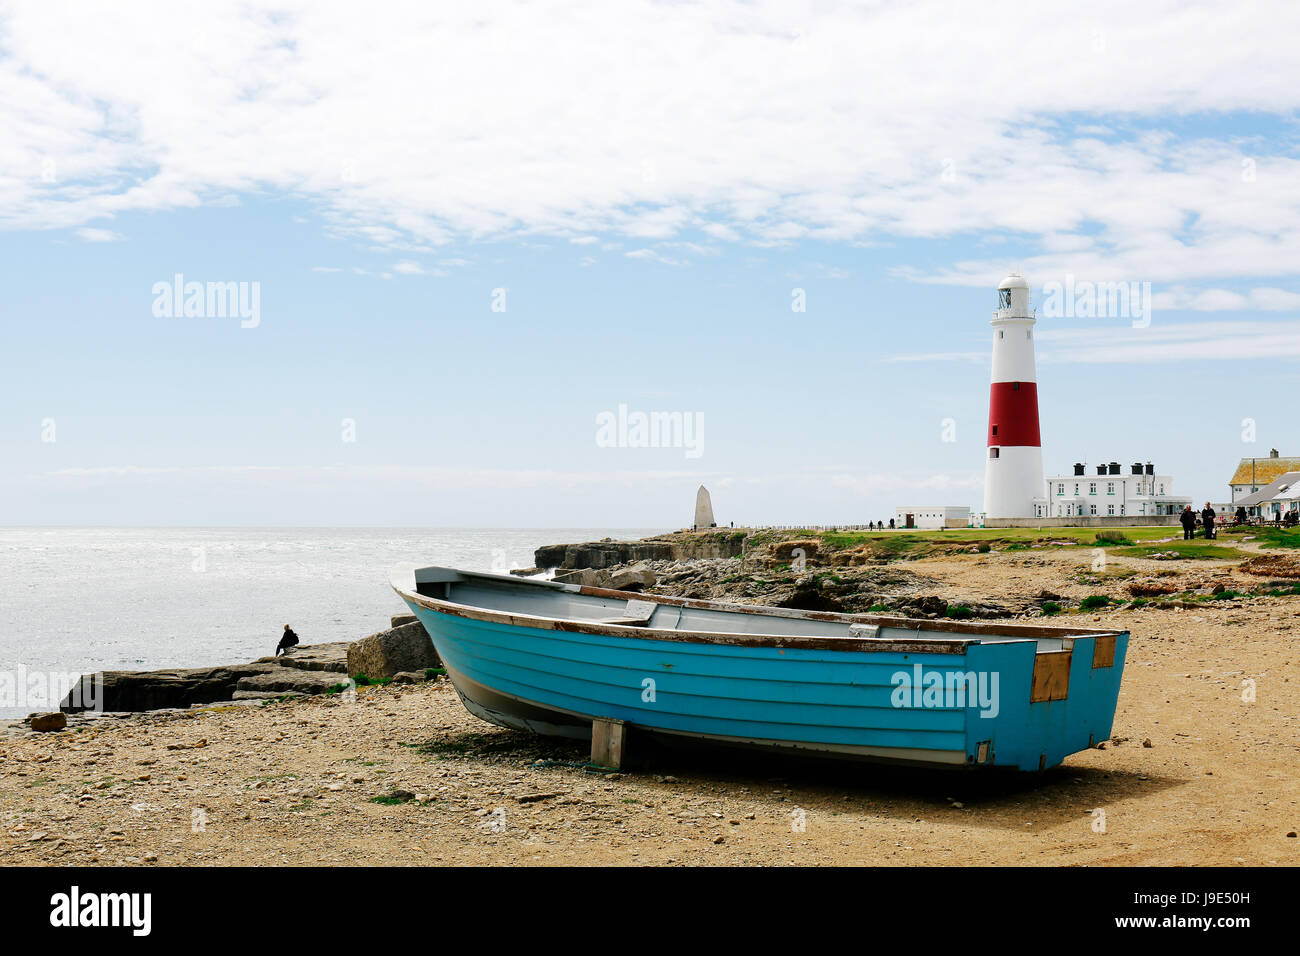 Wooden boat by the seaside and Portland Bill Lighthouse on the Isle of Portland in Dorset, UK on the background Stock Photo